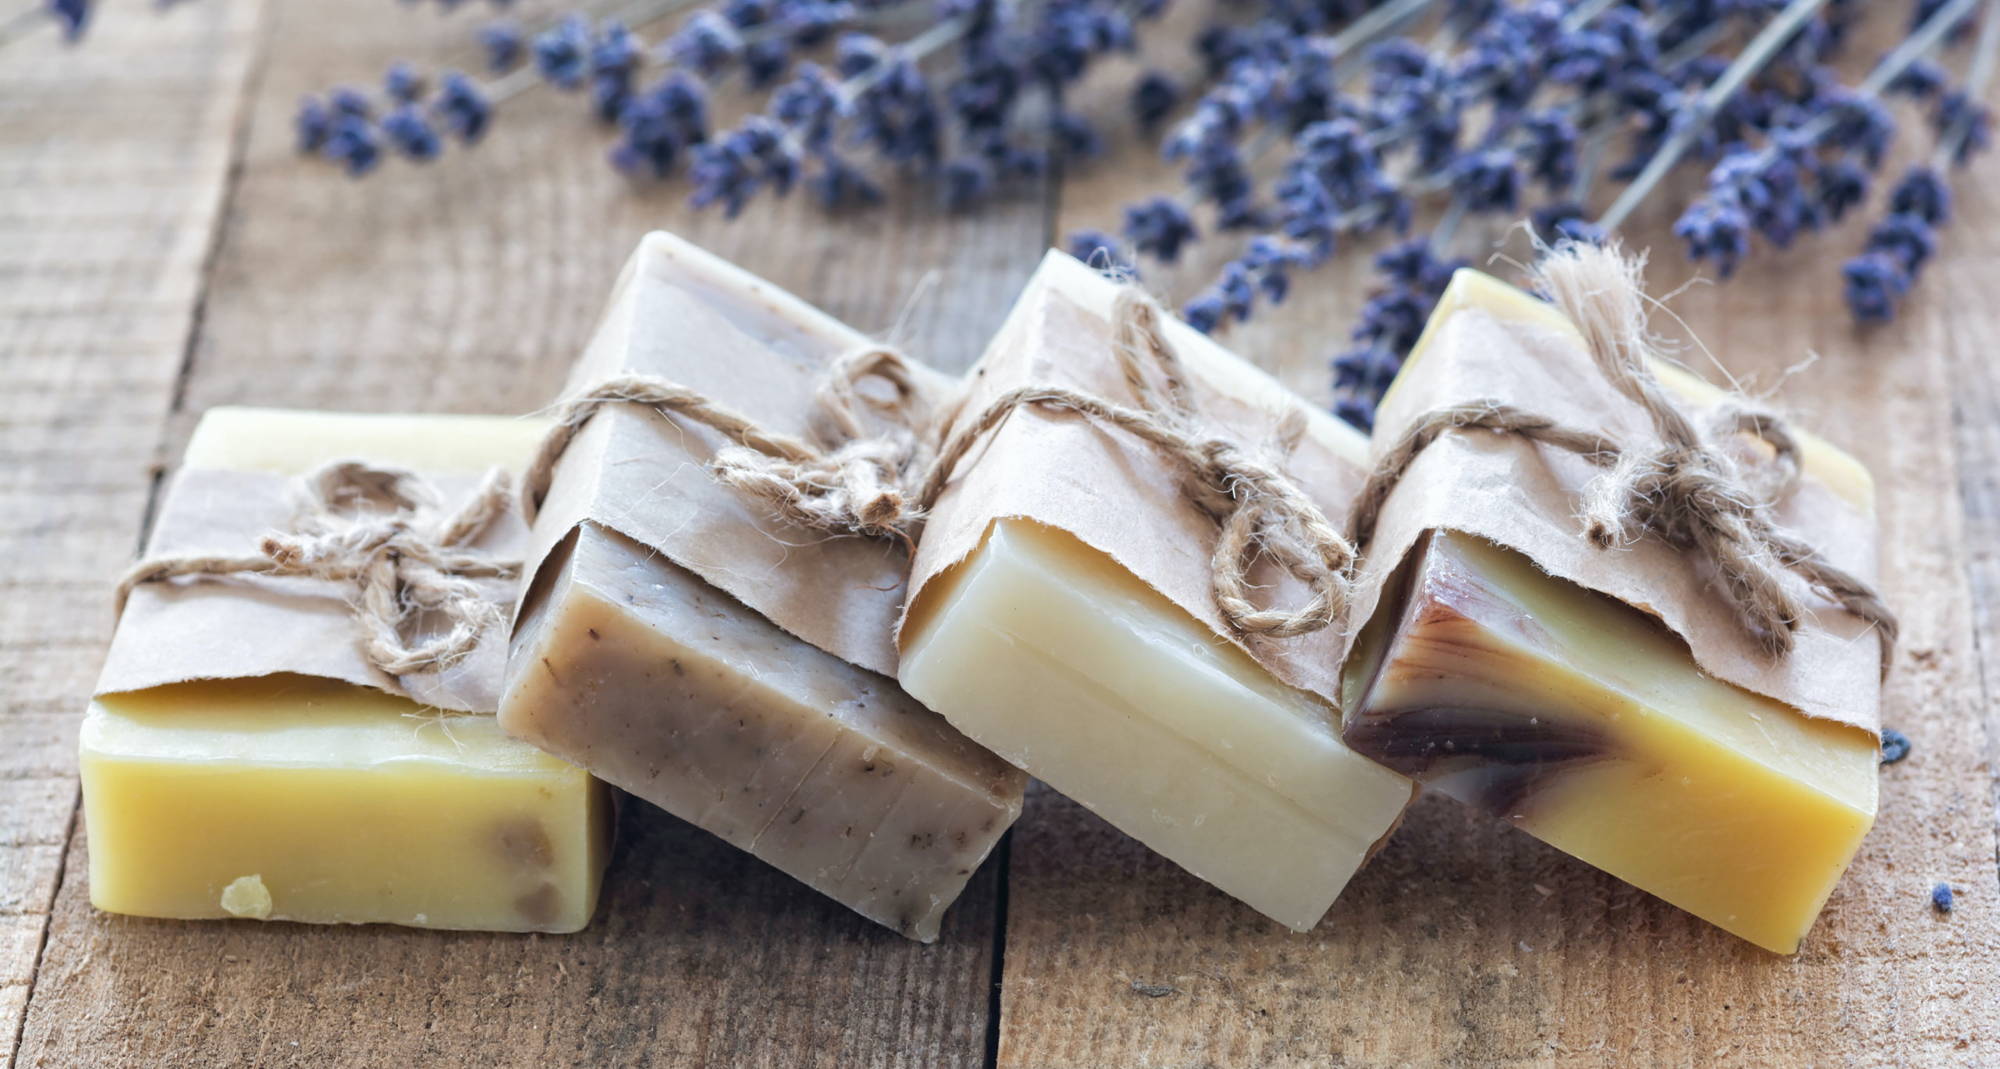 Four bars of twine and paper-wrapped hemp soap with sprigs of lavender on wooden boards.